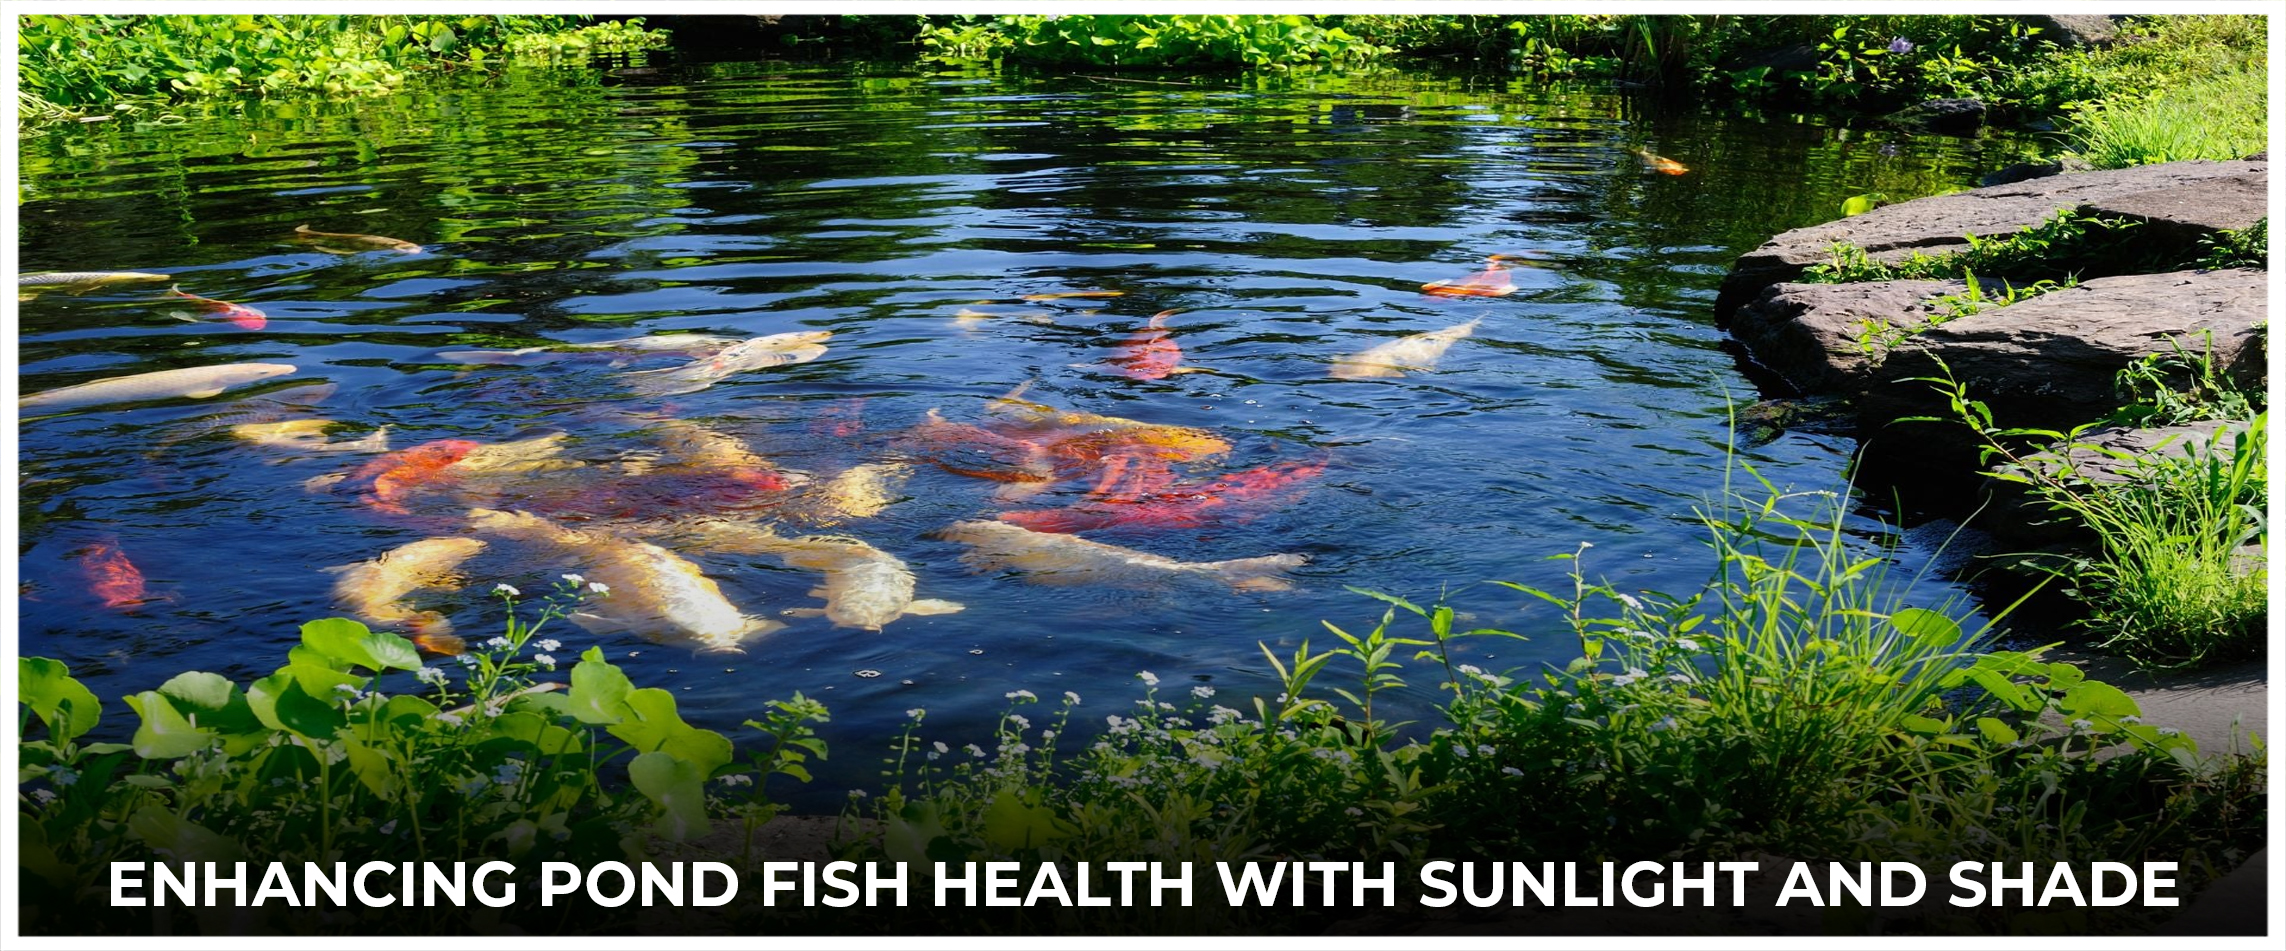  Enhancing Pond Fish Health with Sunlight and Shade